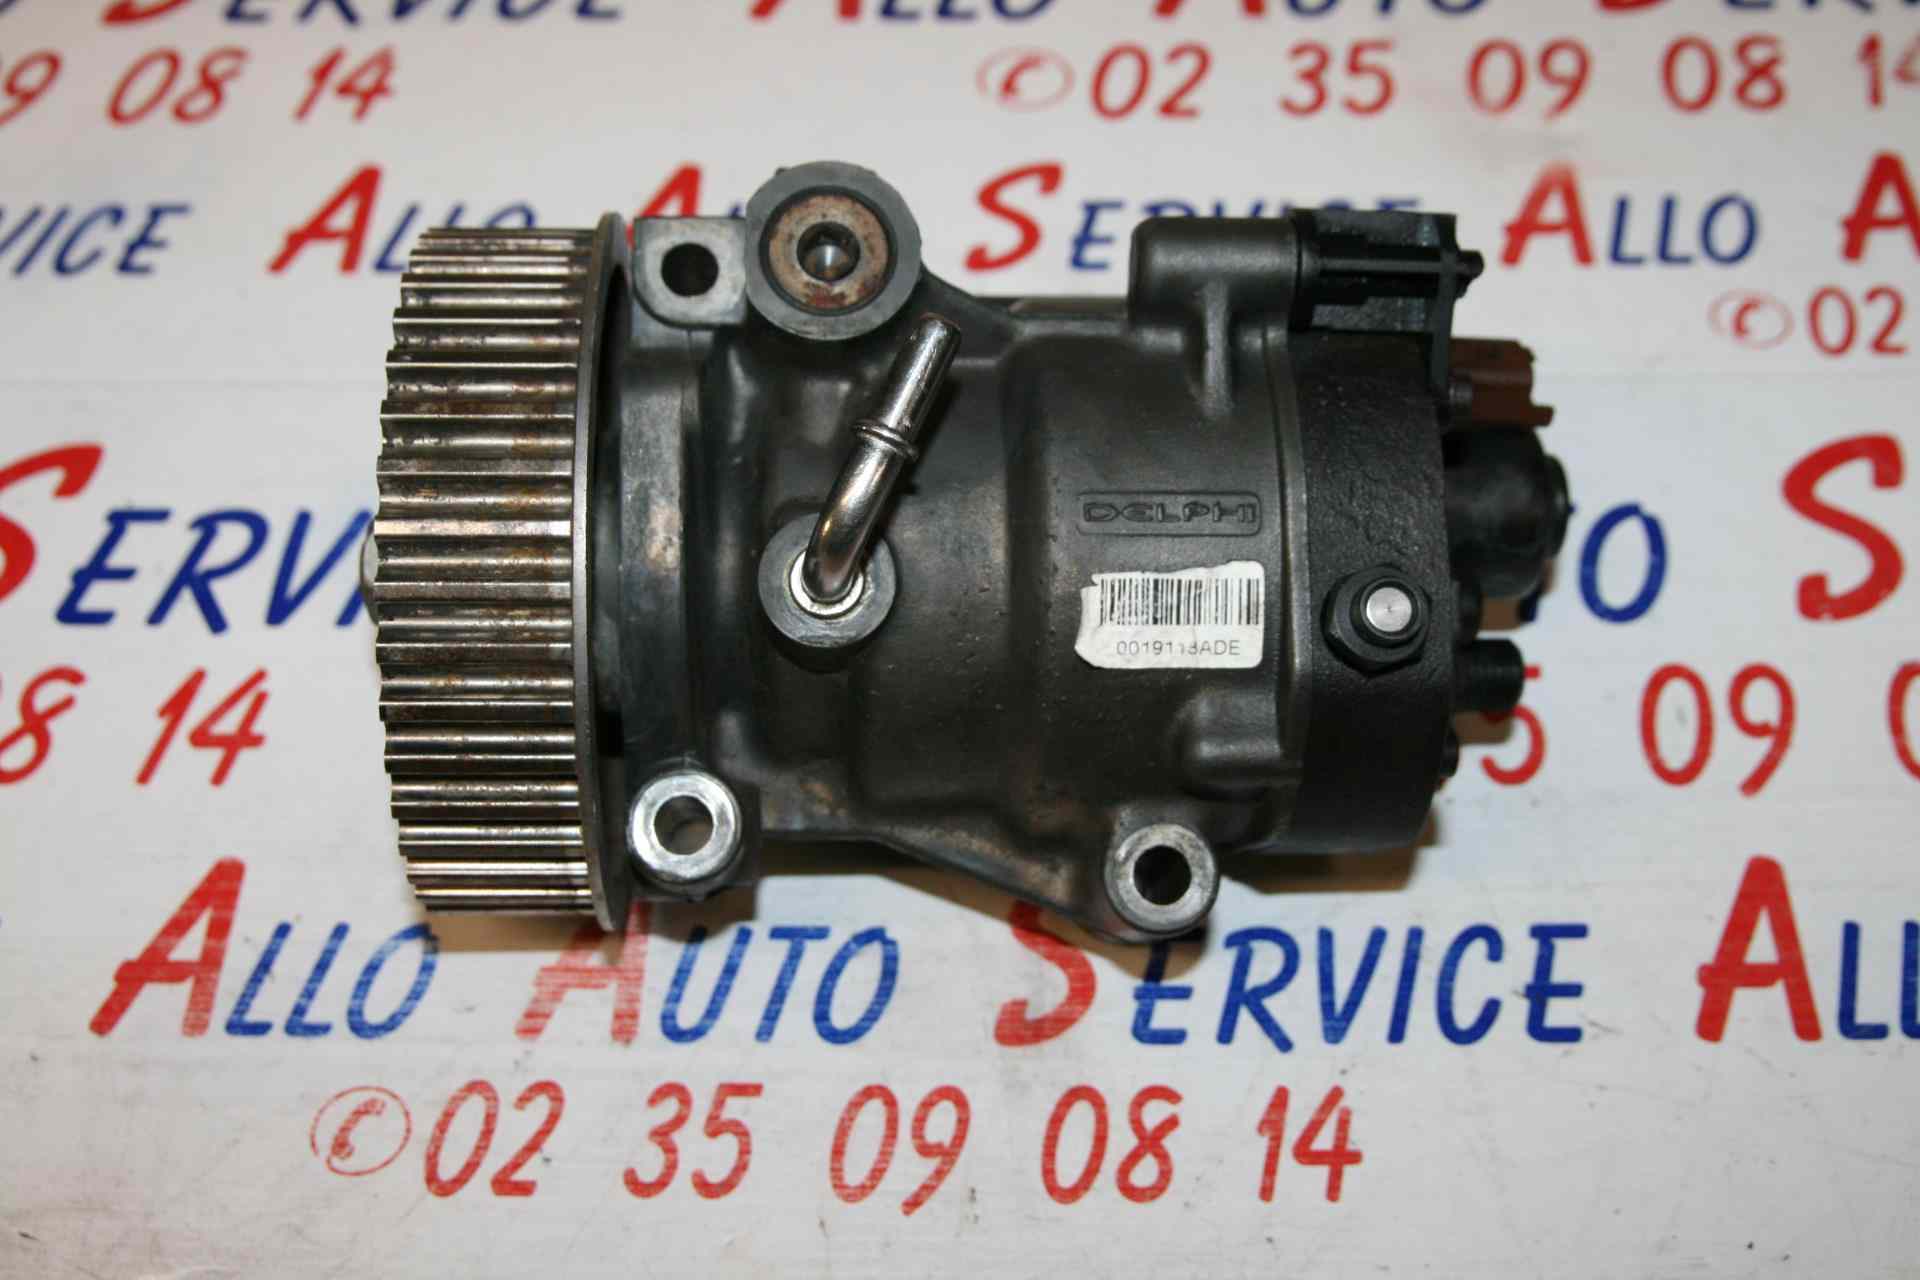 Pompe a Injection 
RENAULT Clio 2 Phase 2 1.5 DCI

8200707450-B ,R9042A70C 1,5 dci

